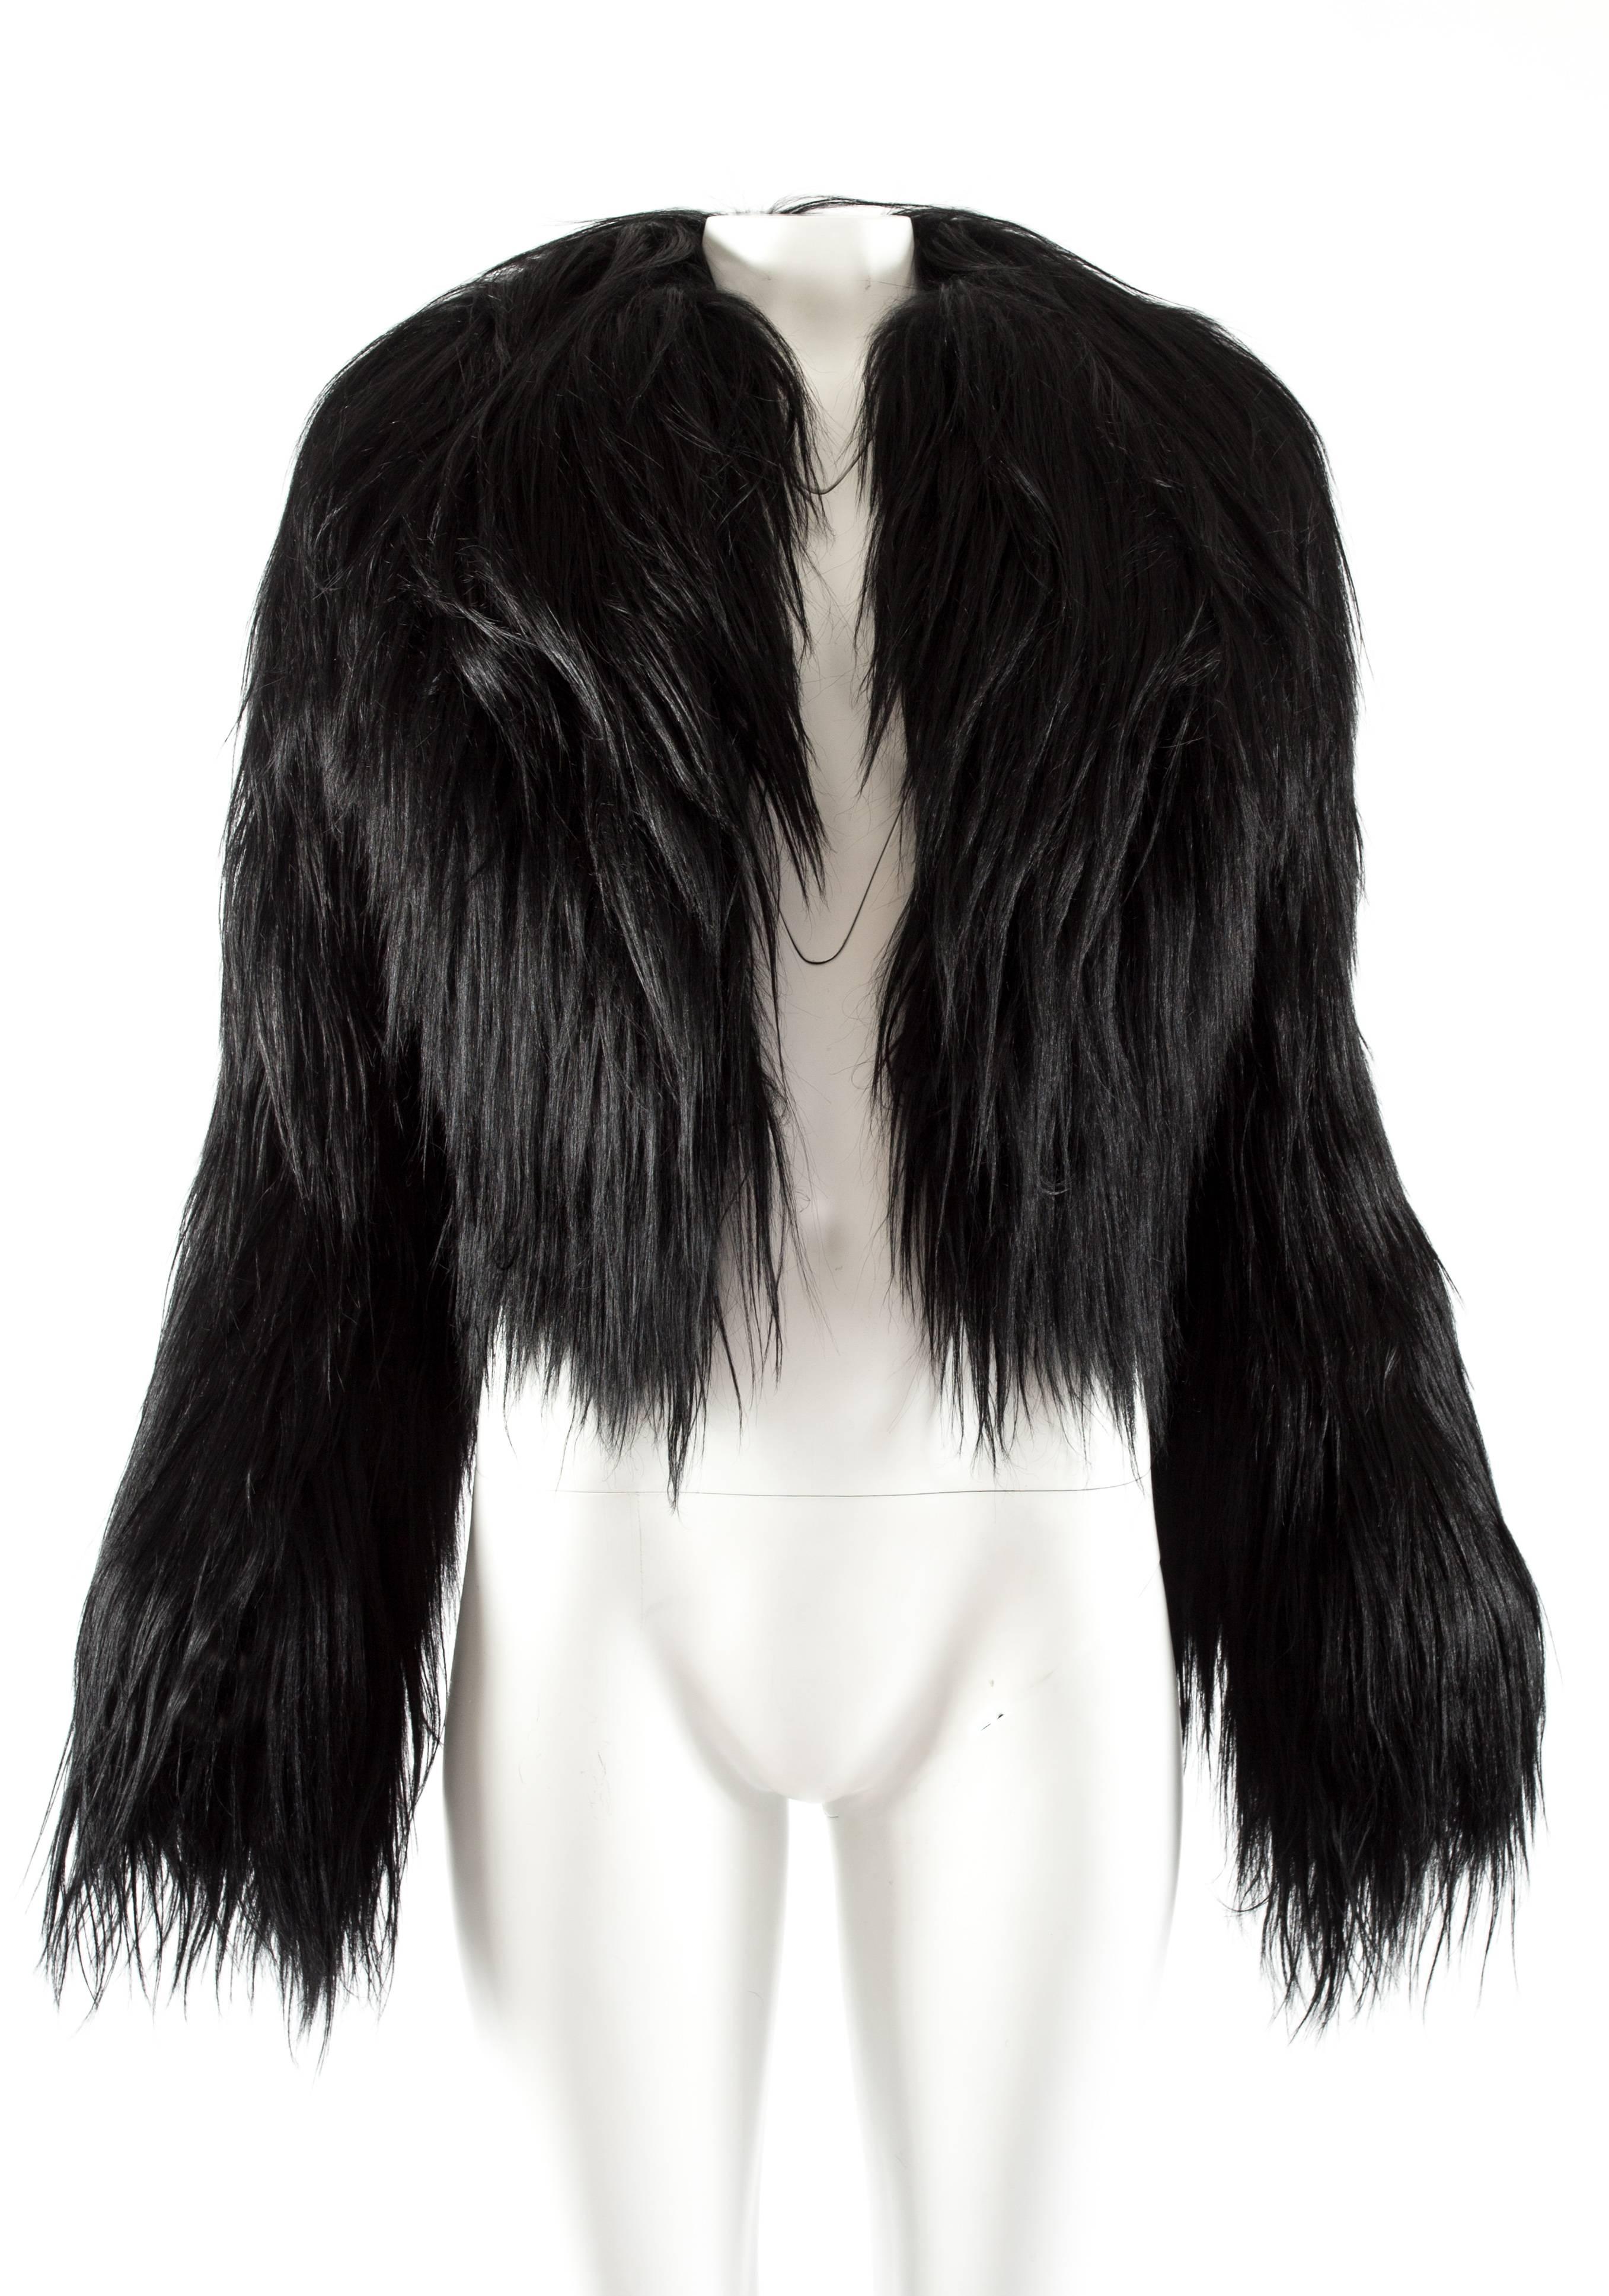 Introducing the Azzedine Alaia black goat hair jacket, a luxurious and exquisite piece that exemplifies the designer's mastery in creating timeless and sophisticated fashion.

Crafted from sumptuous goat hair in a striking black hue, this jacket